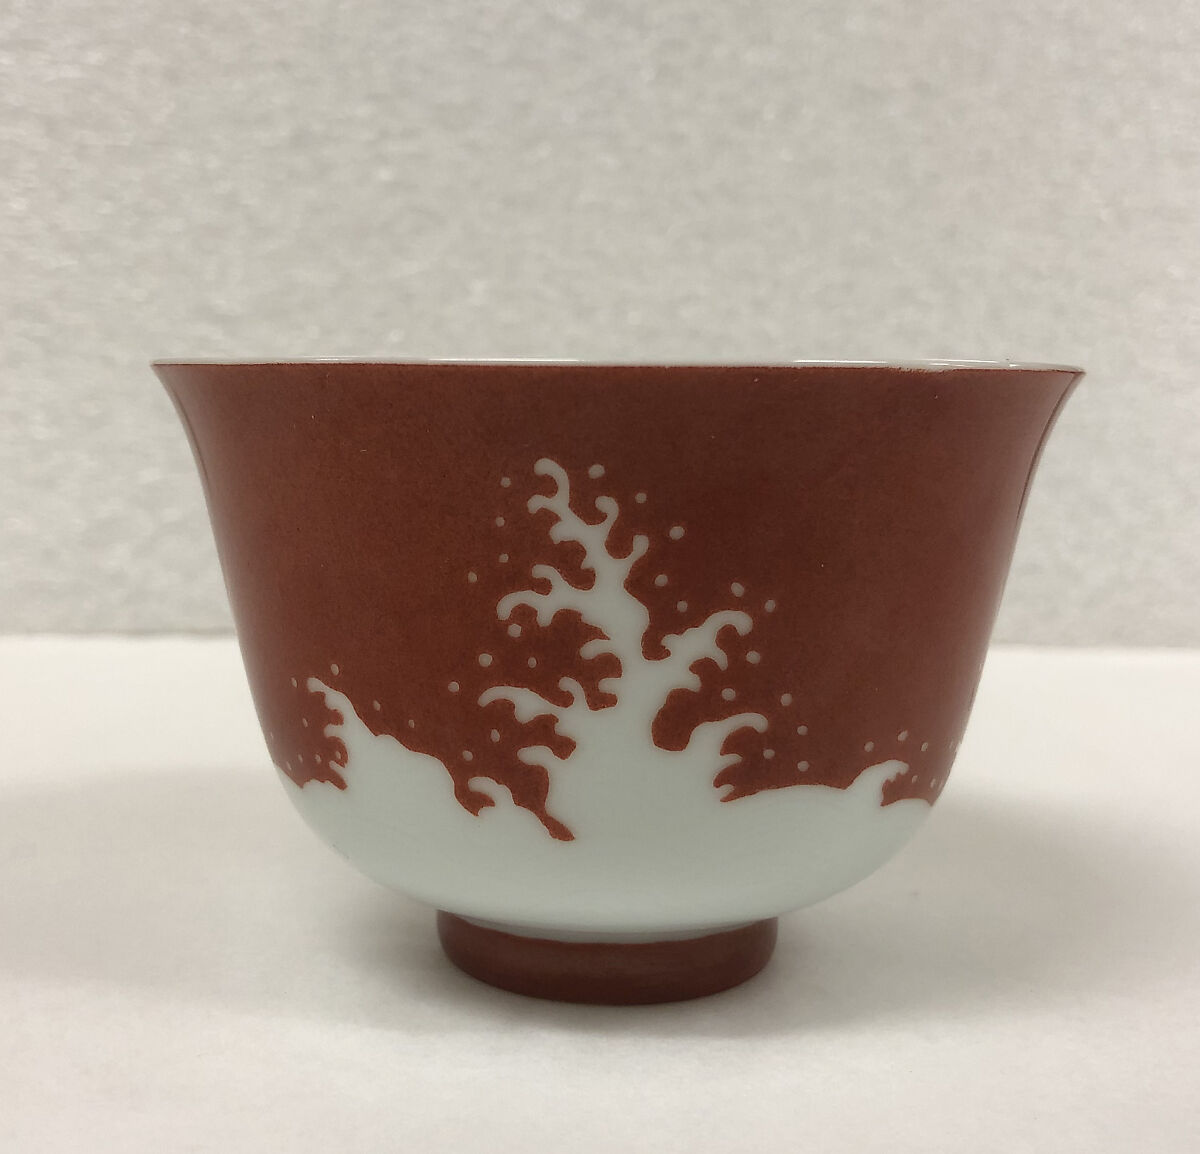 Cup with design of waves, Porcelain painted with red enamel and incised decoration (Jingdezhen ware), China 